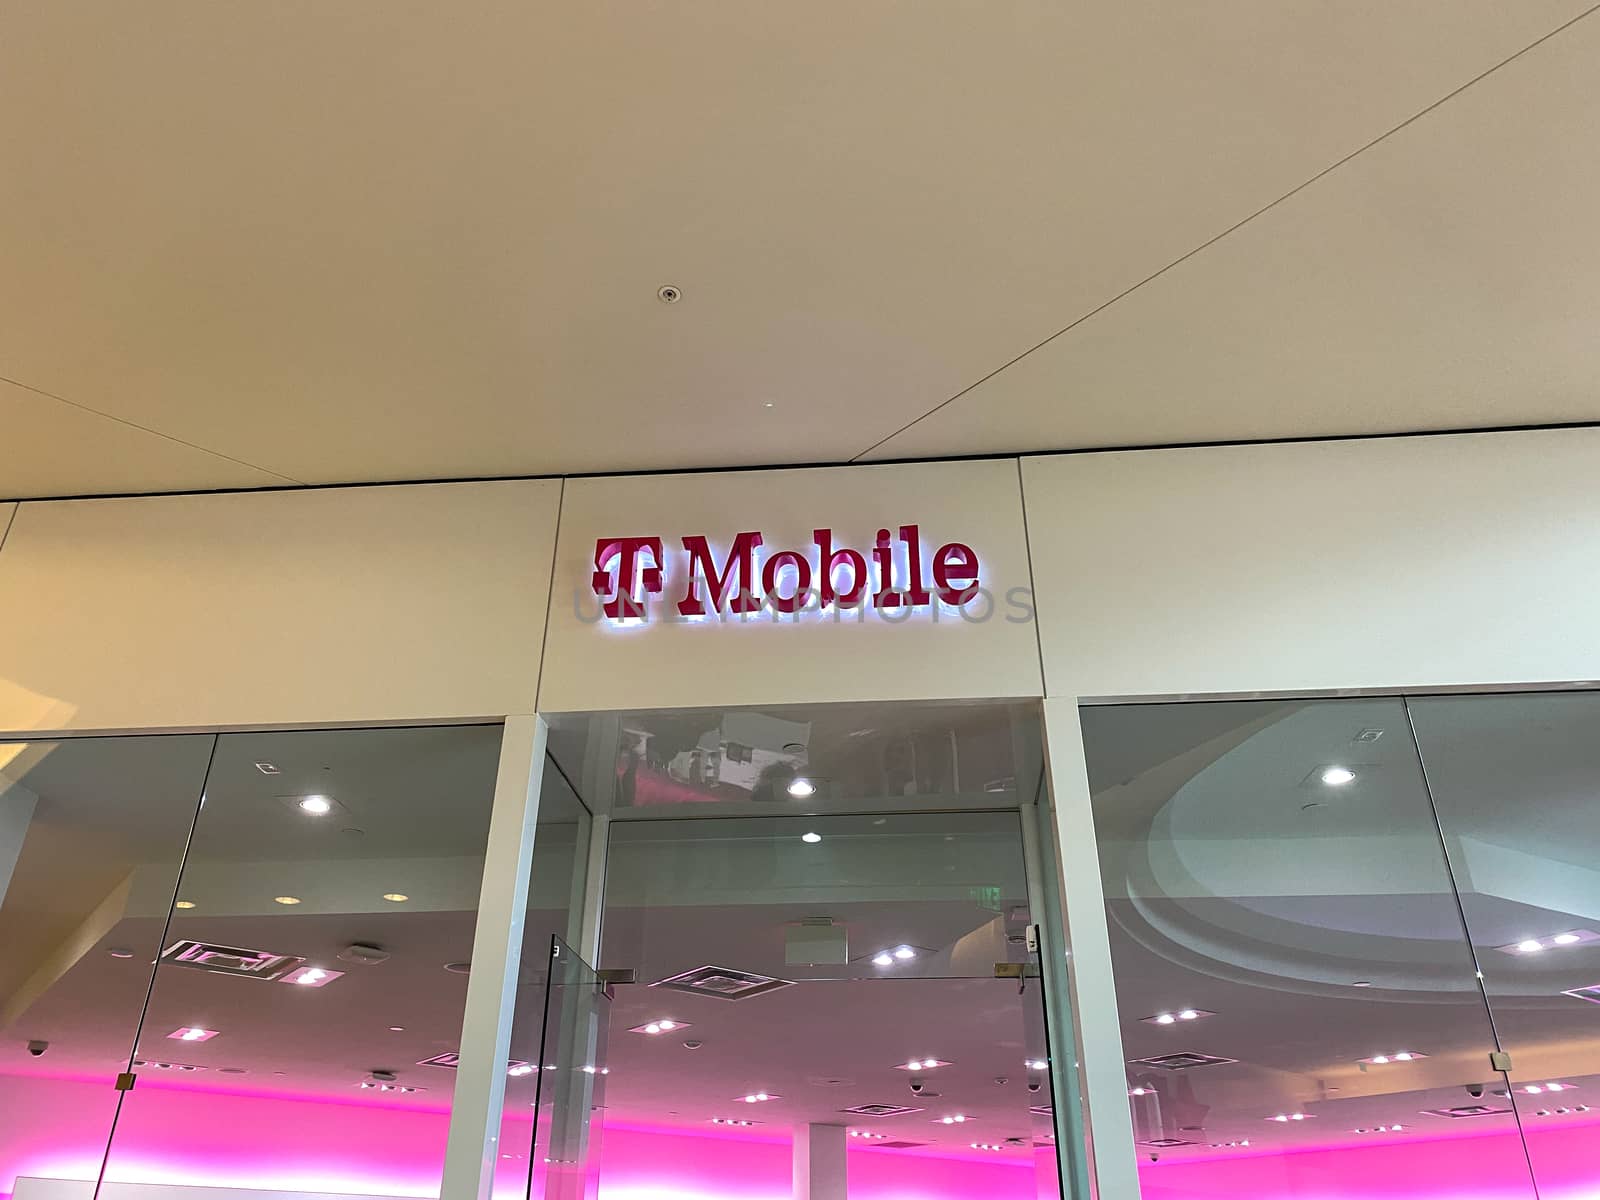 The exterior of a T Mobile store at the Millenia Mall in Orlando by Jshanebutt